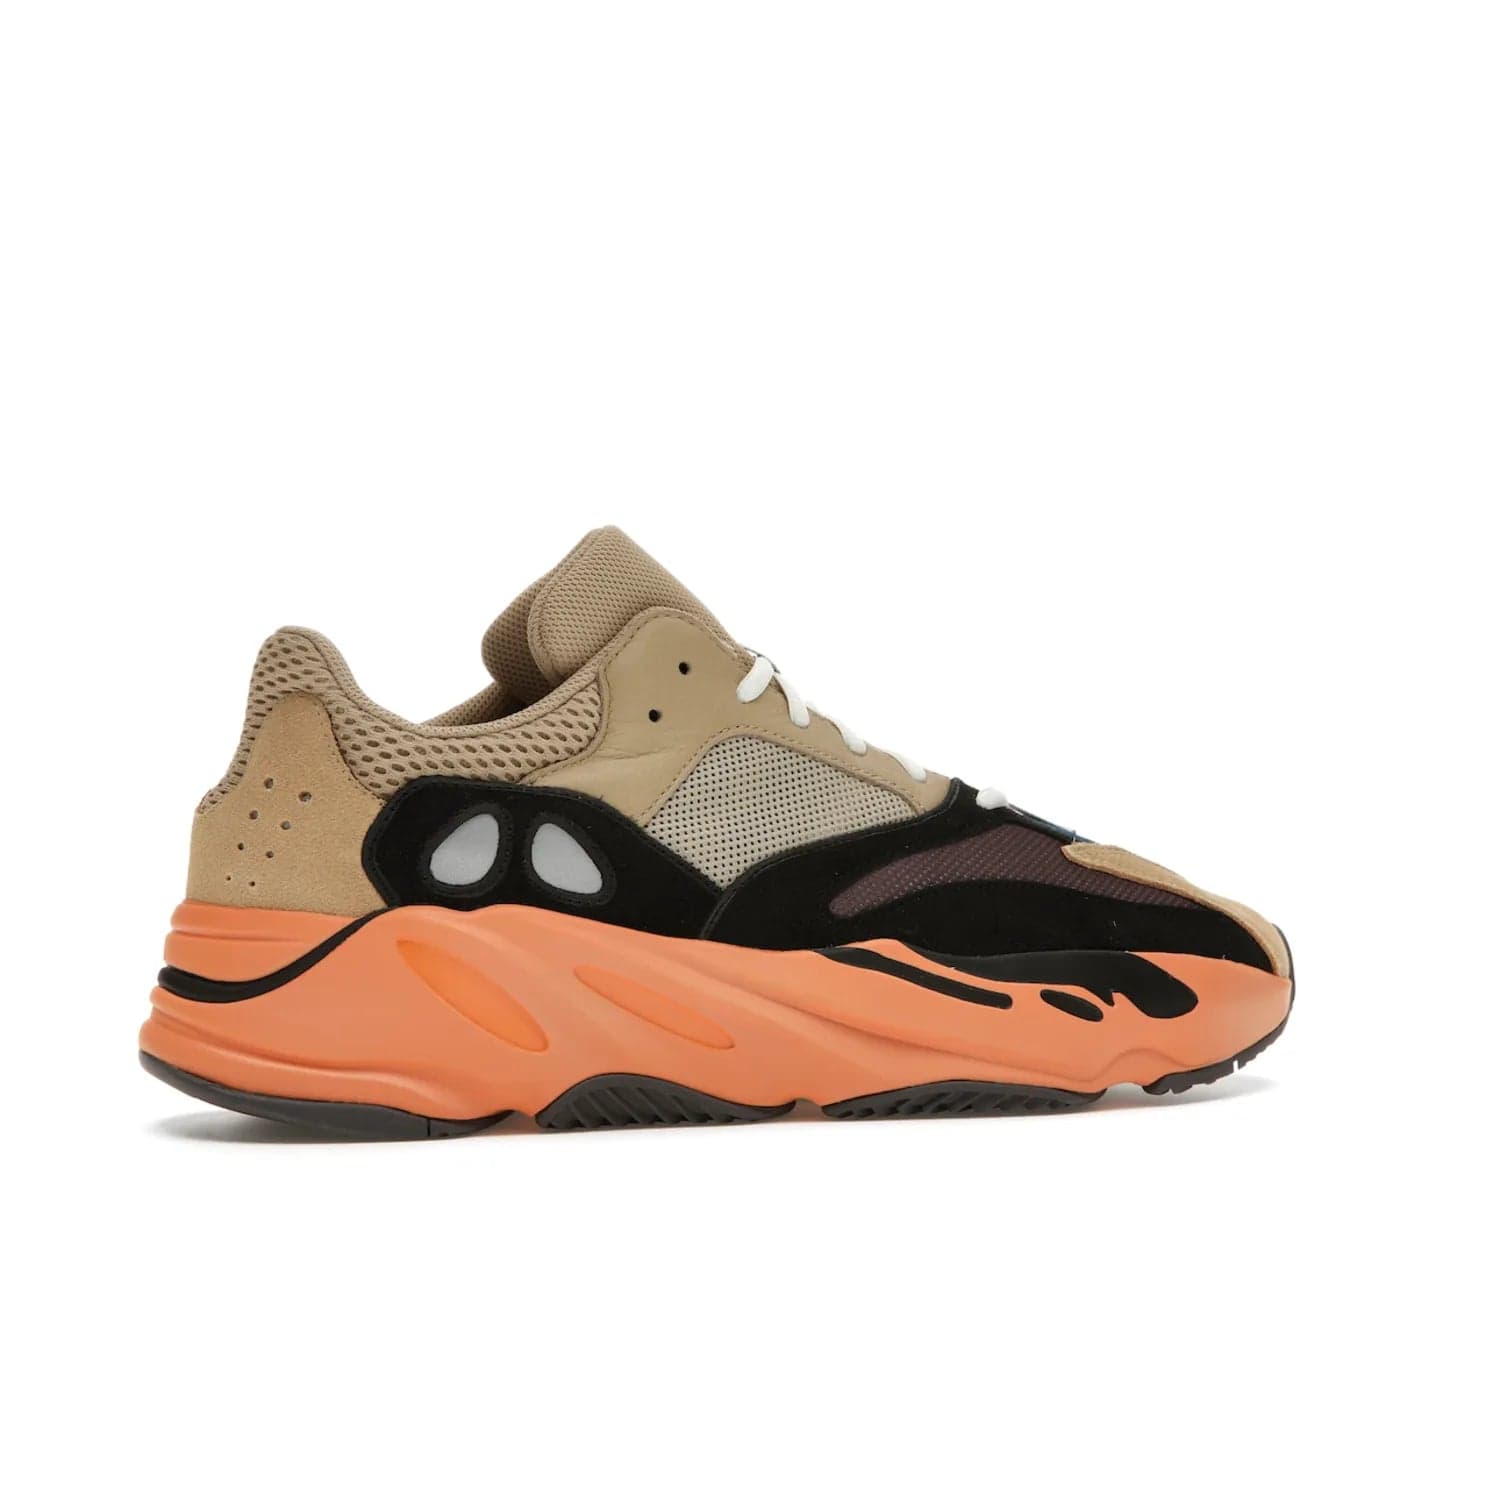 adidas Yeezy Boost 700 Enflame Amber - Image 35 - Only at www.BallersClubKickz.com - Adidas Yeezy Boost 700 Enflame Amber: Eye-catching design with pale yellow, brown, teal, and orange! Get yours in June 2021.